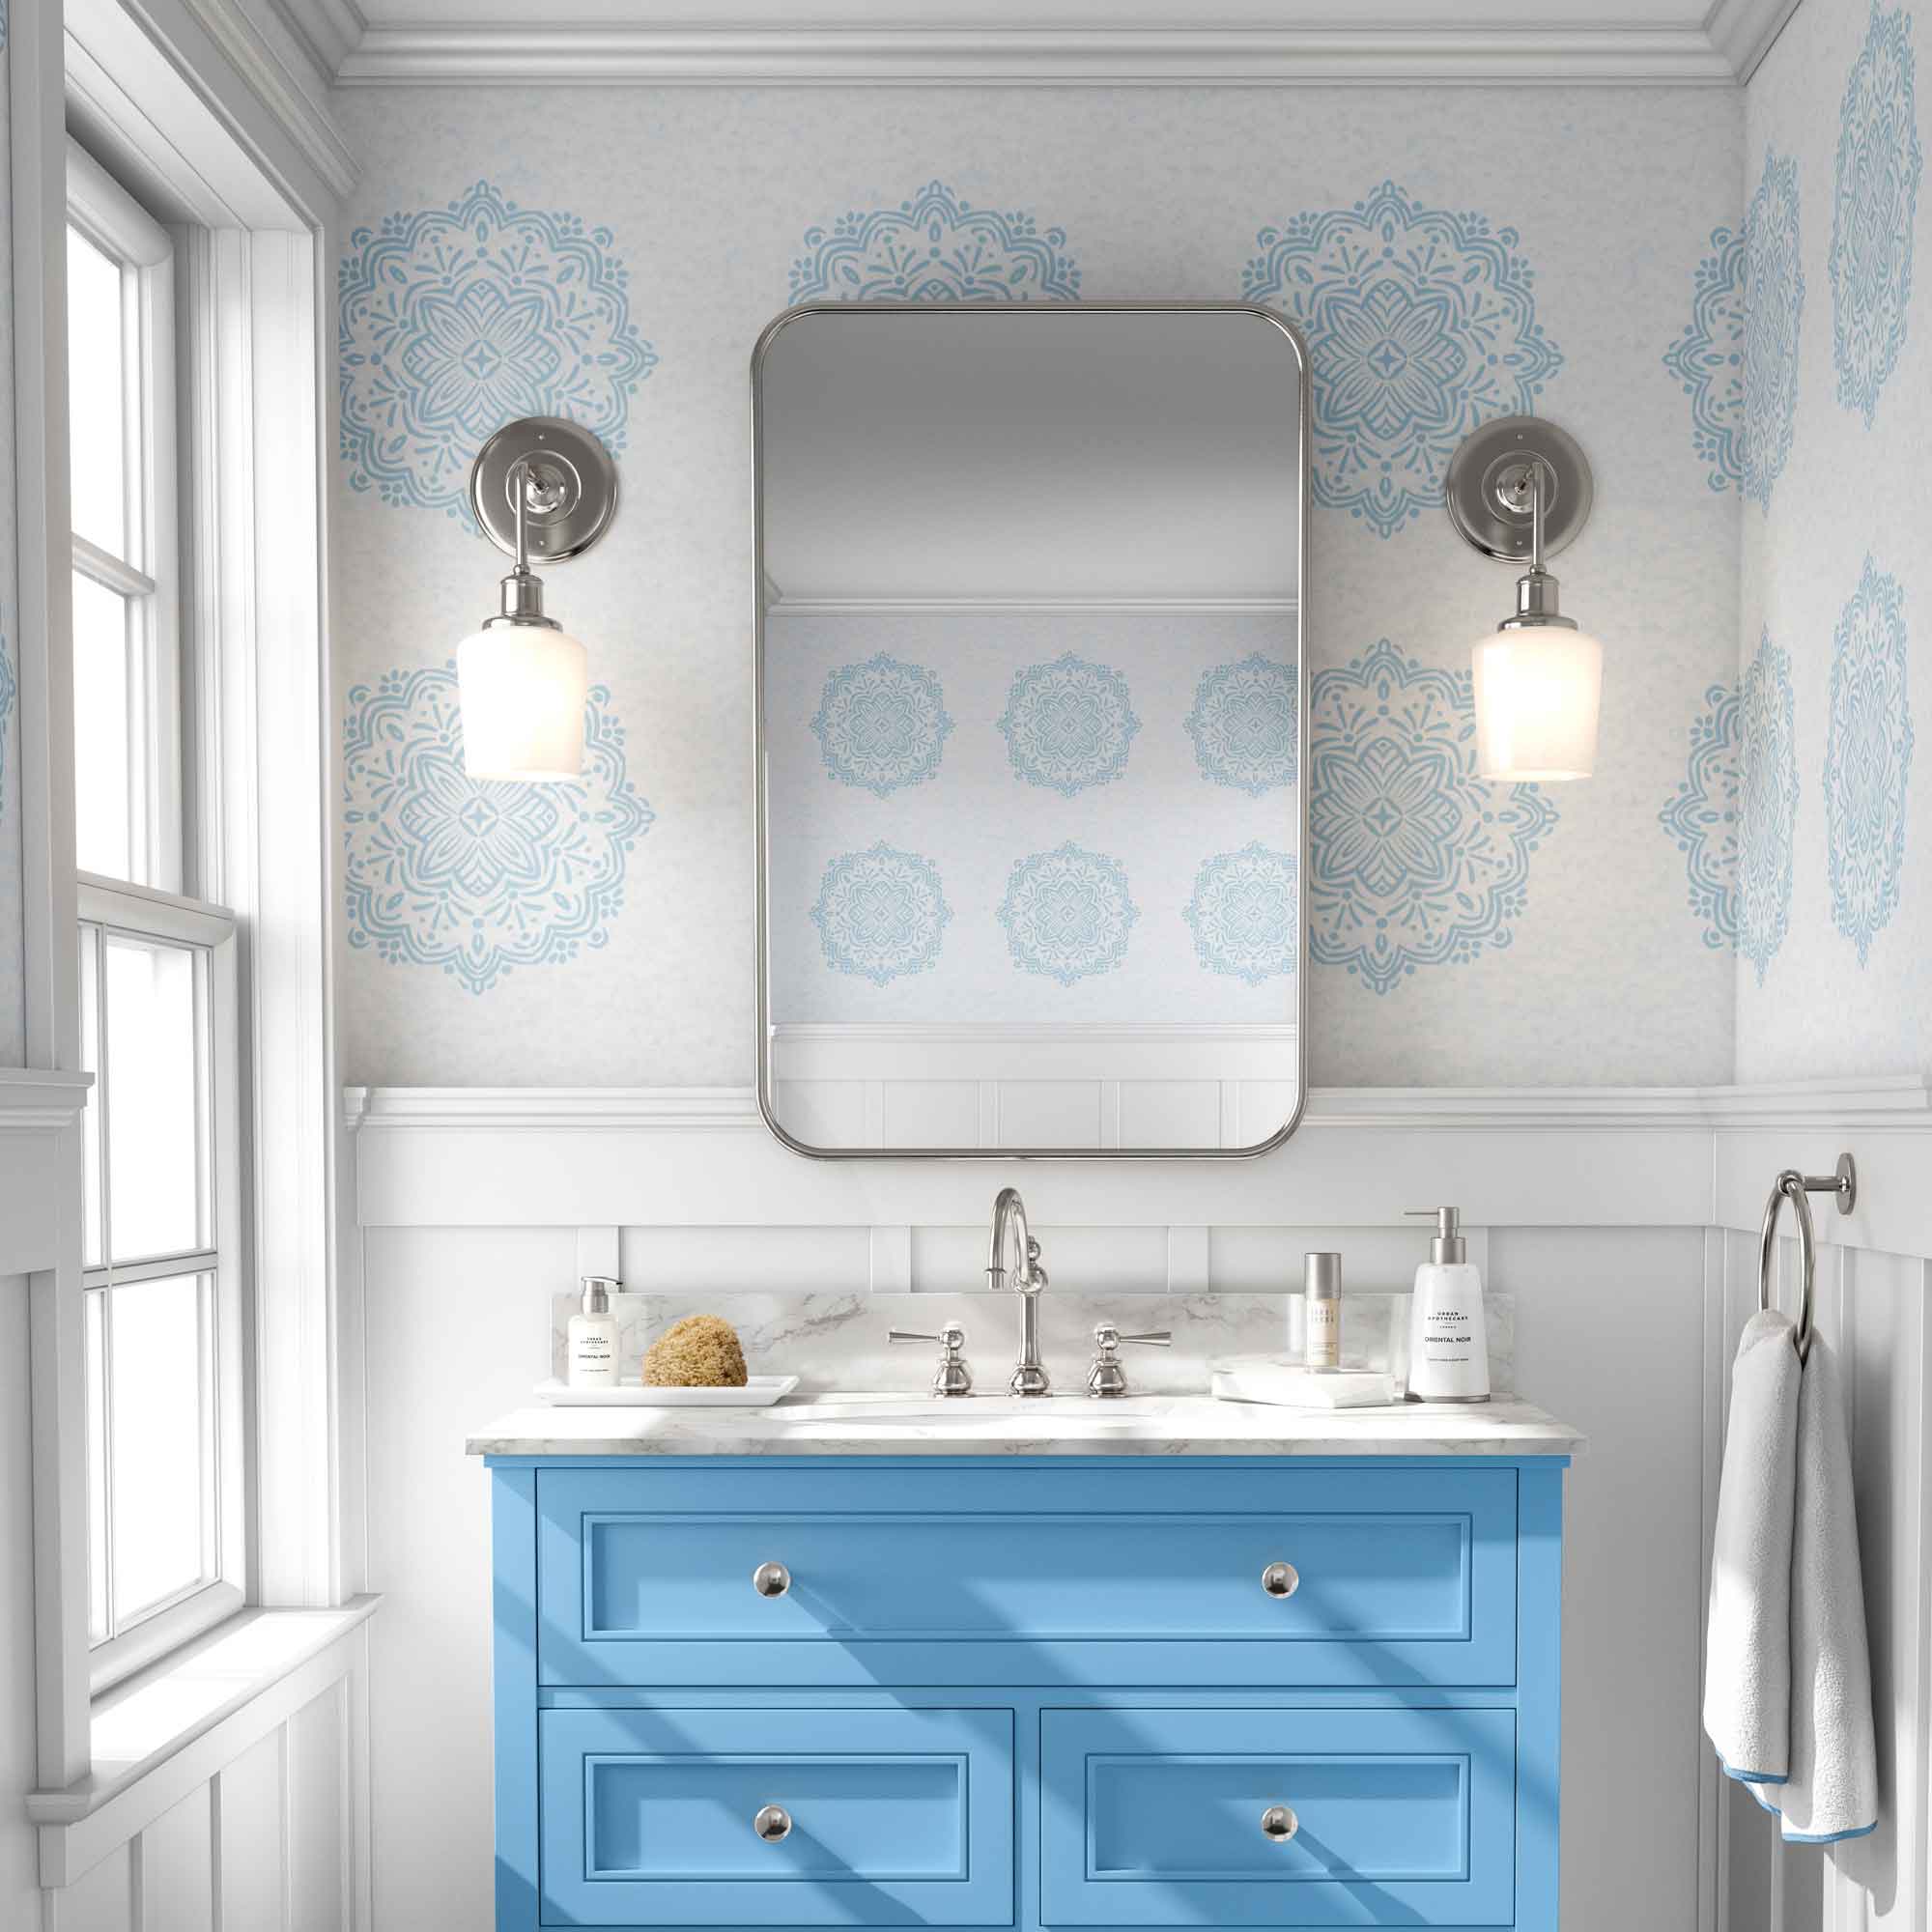 Hand-Drawn Blue Boho Mandalas on White Watercolor Textured Background Removable Peel & Stick and Pre-Pasted Wallpaper - XL Size - Bathroom Example